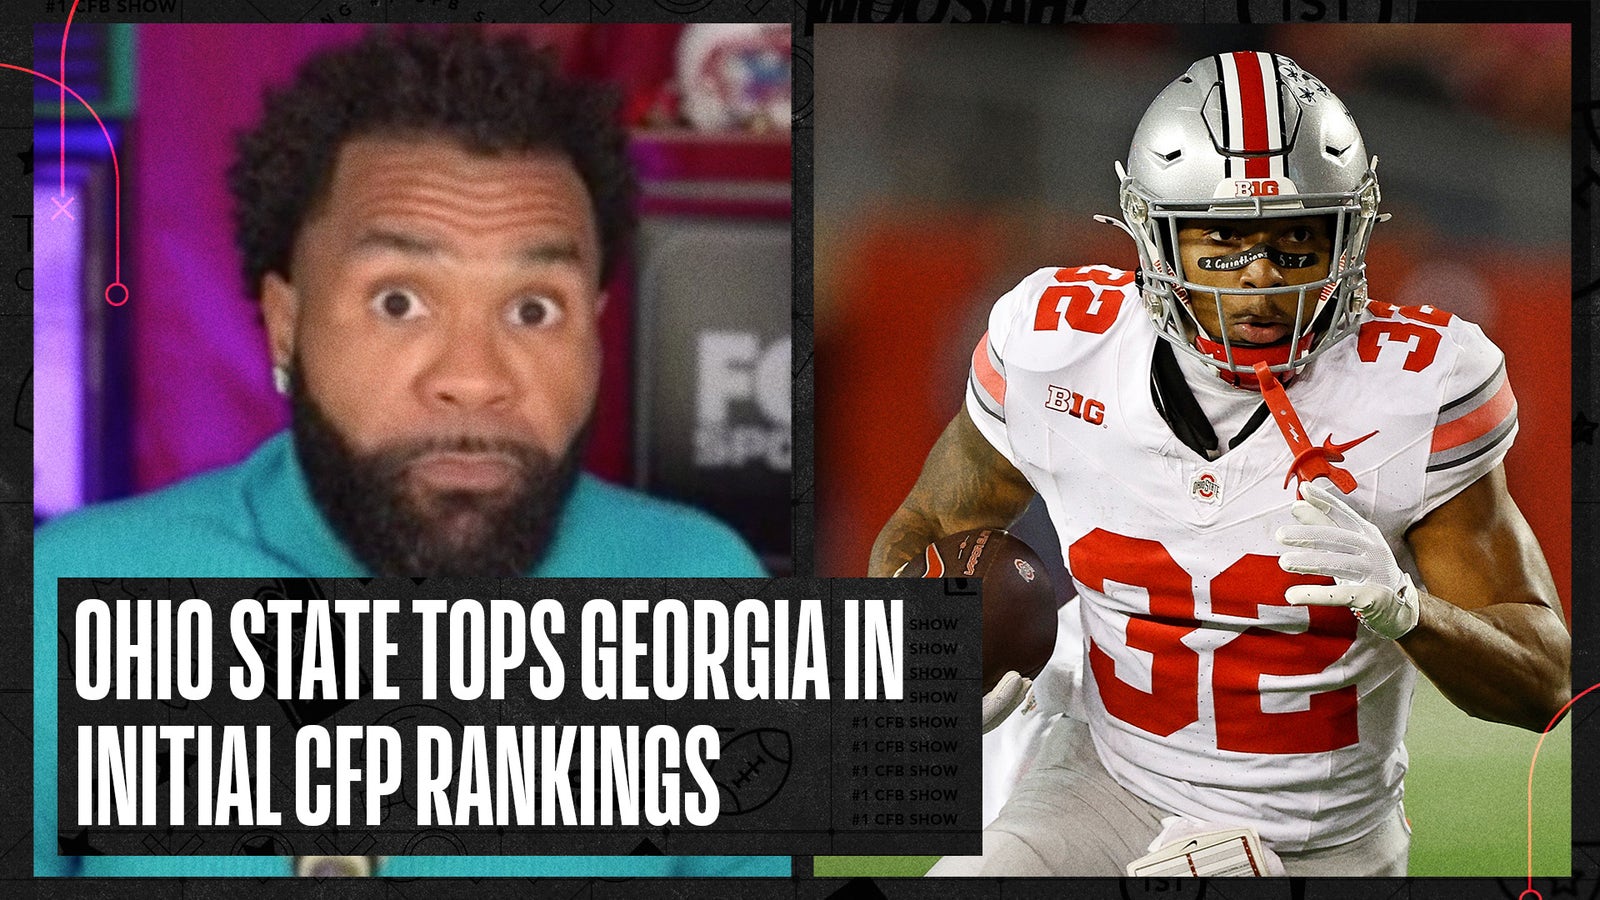 Ohio State ranked above Georgia in the initial CFP rankings — RJ Young reacts